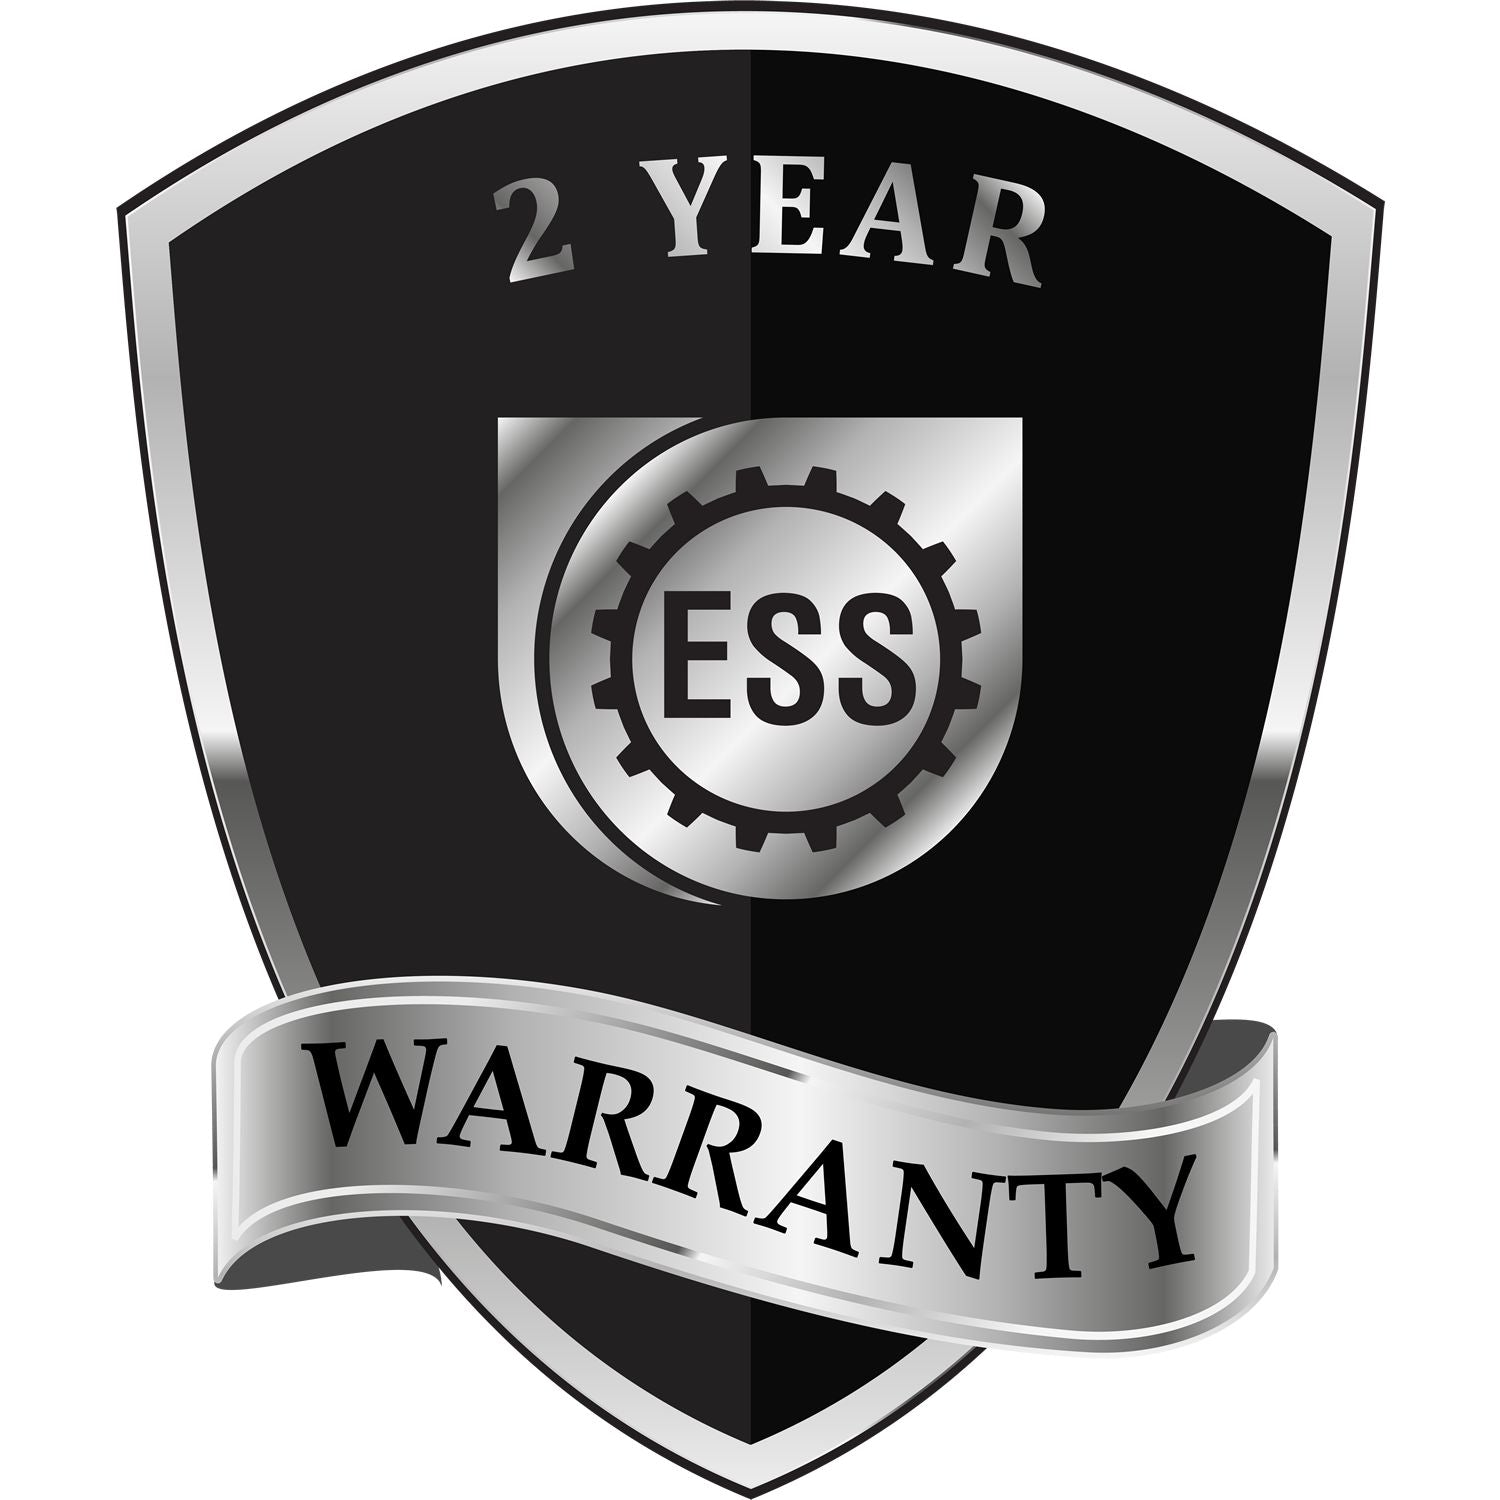 A badge or emblem showing a warranty icon for the Iowa Engineer Desk Seal